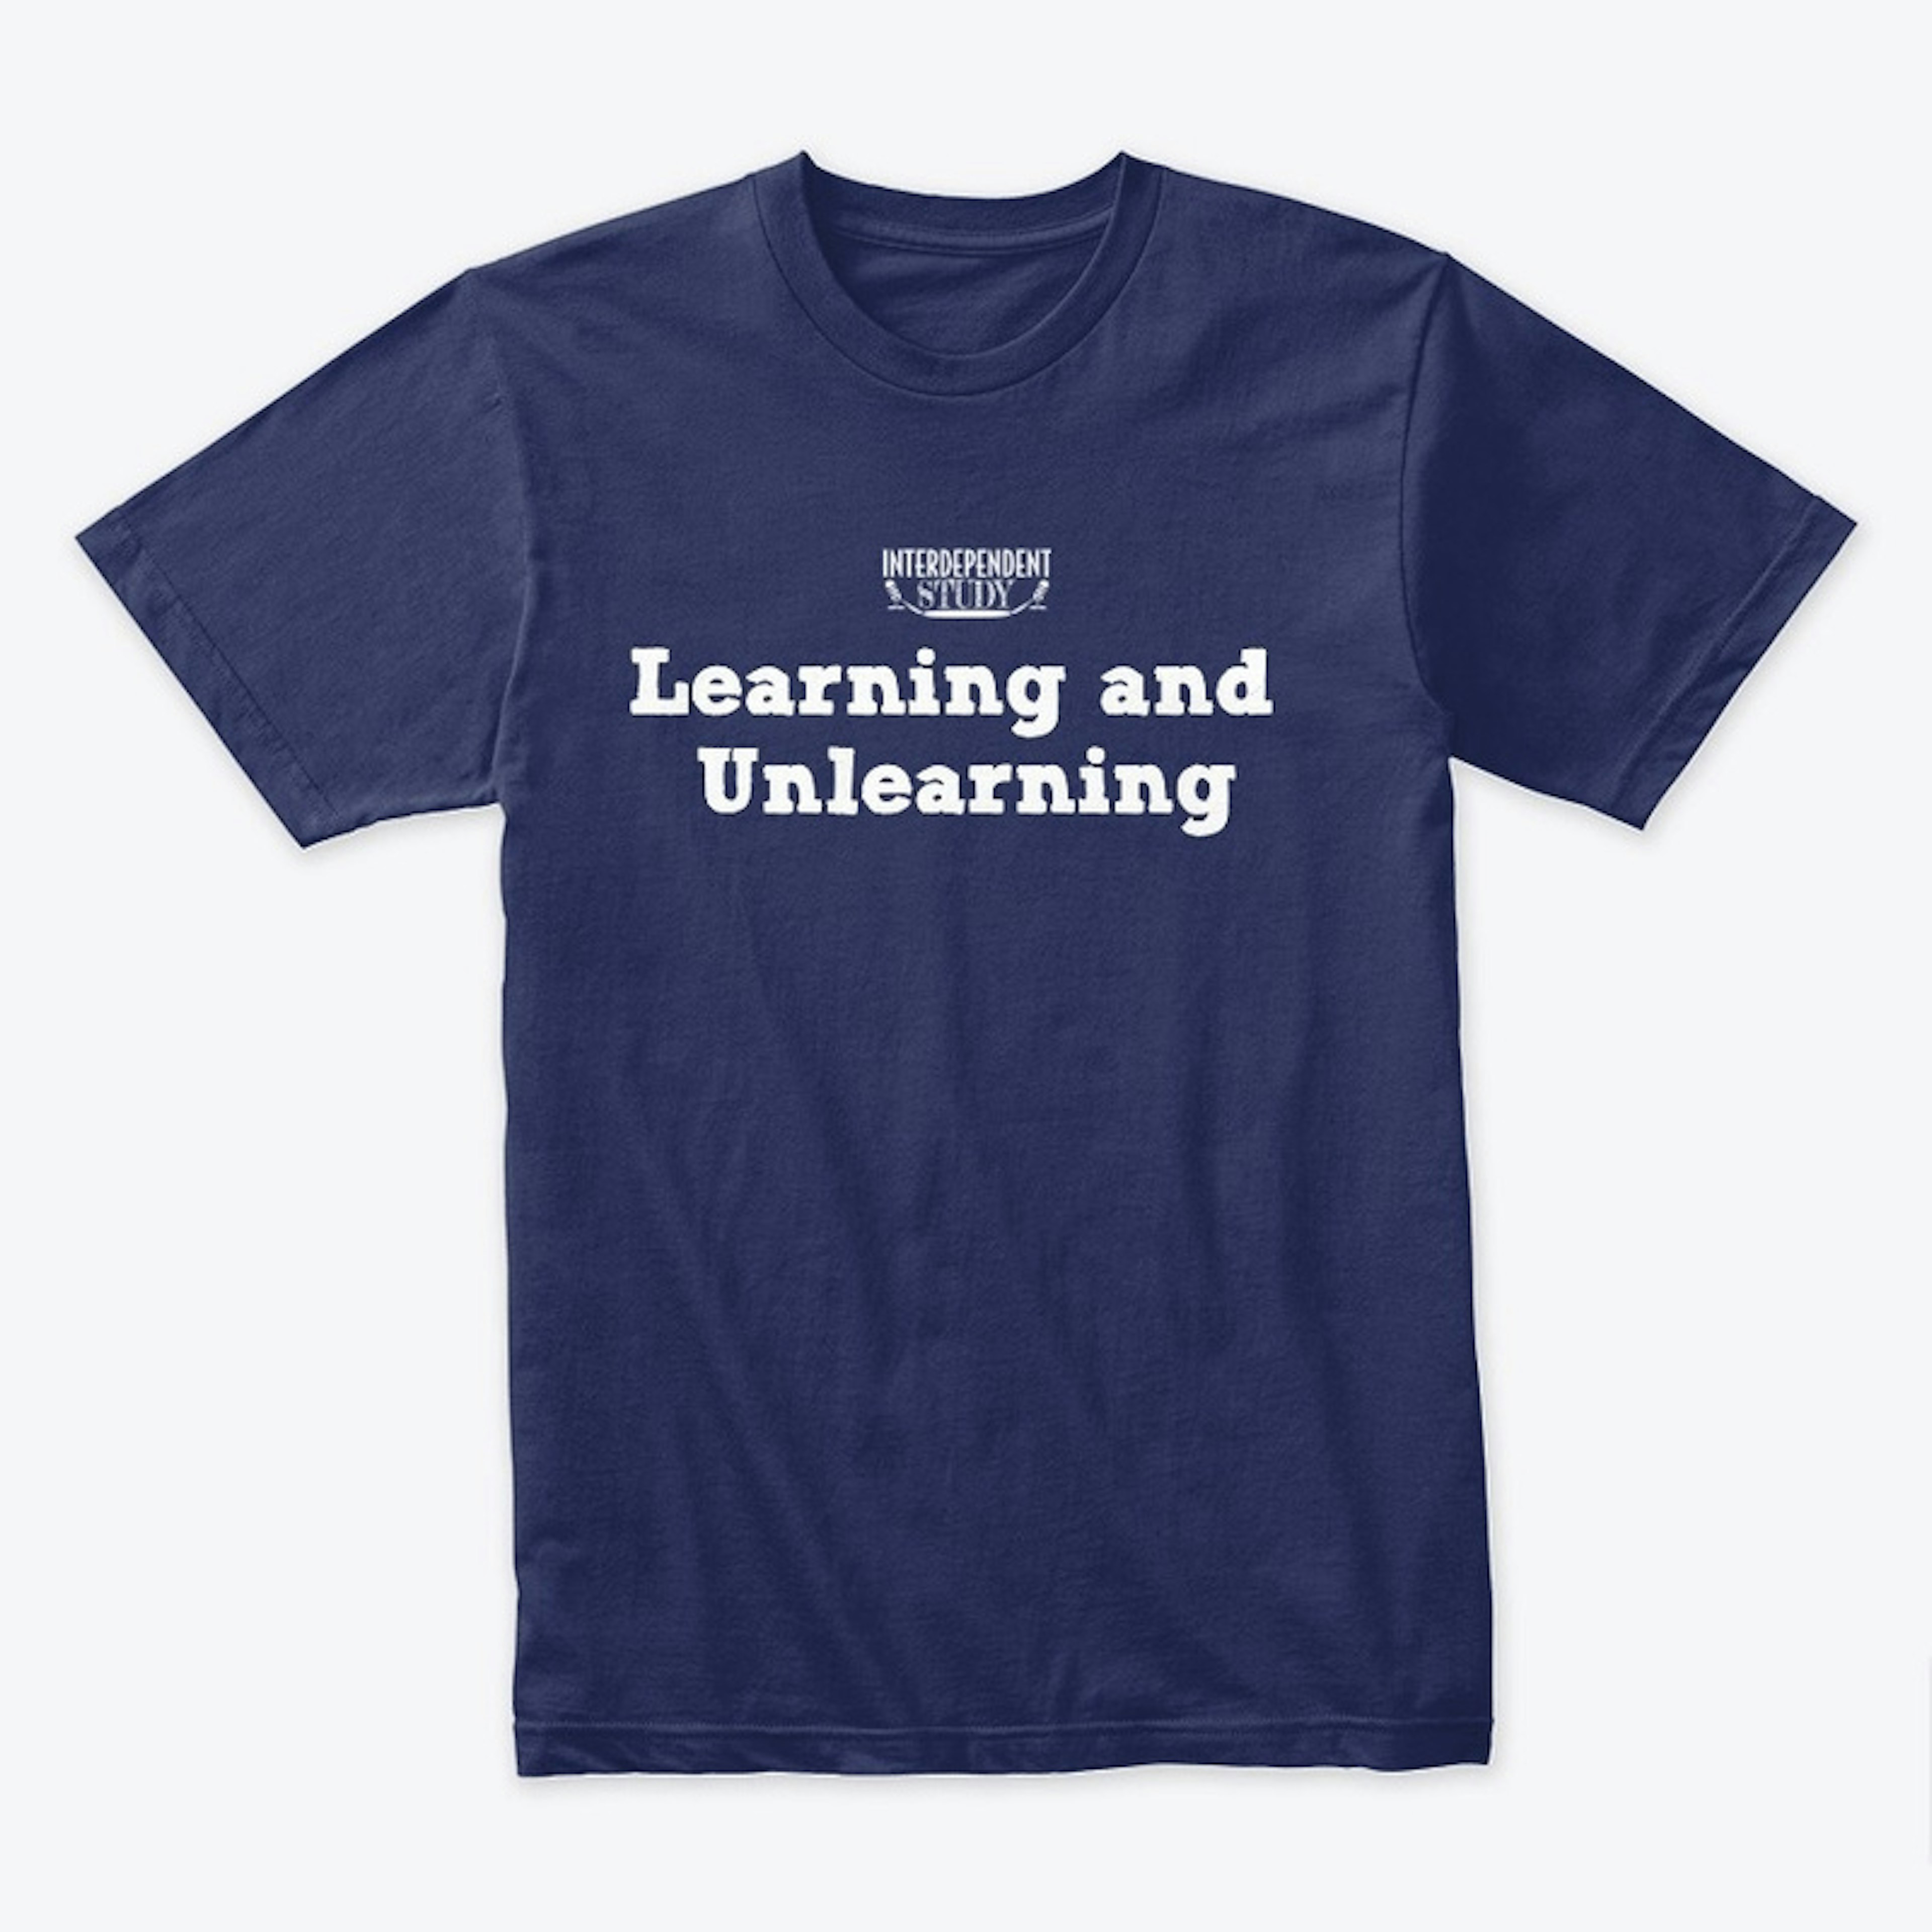 Learning & Unlearning Tee